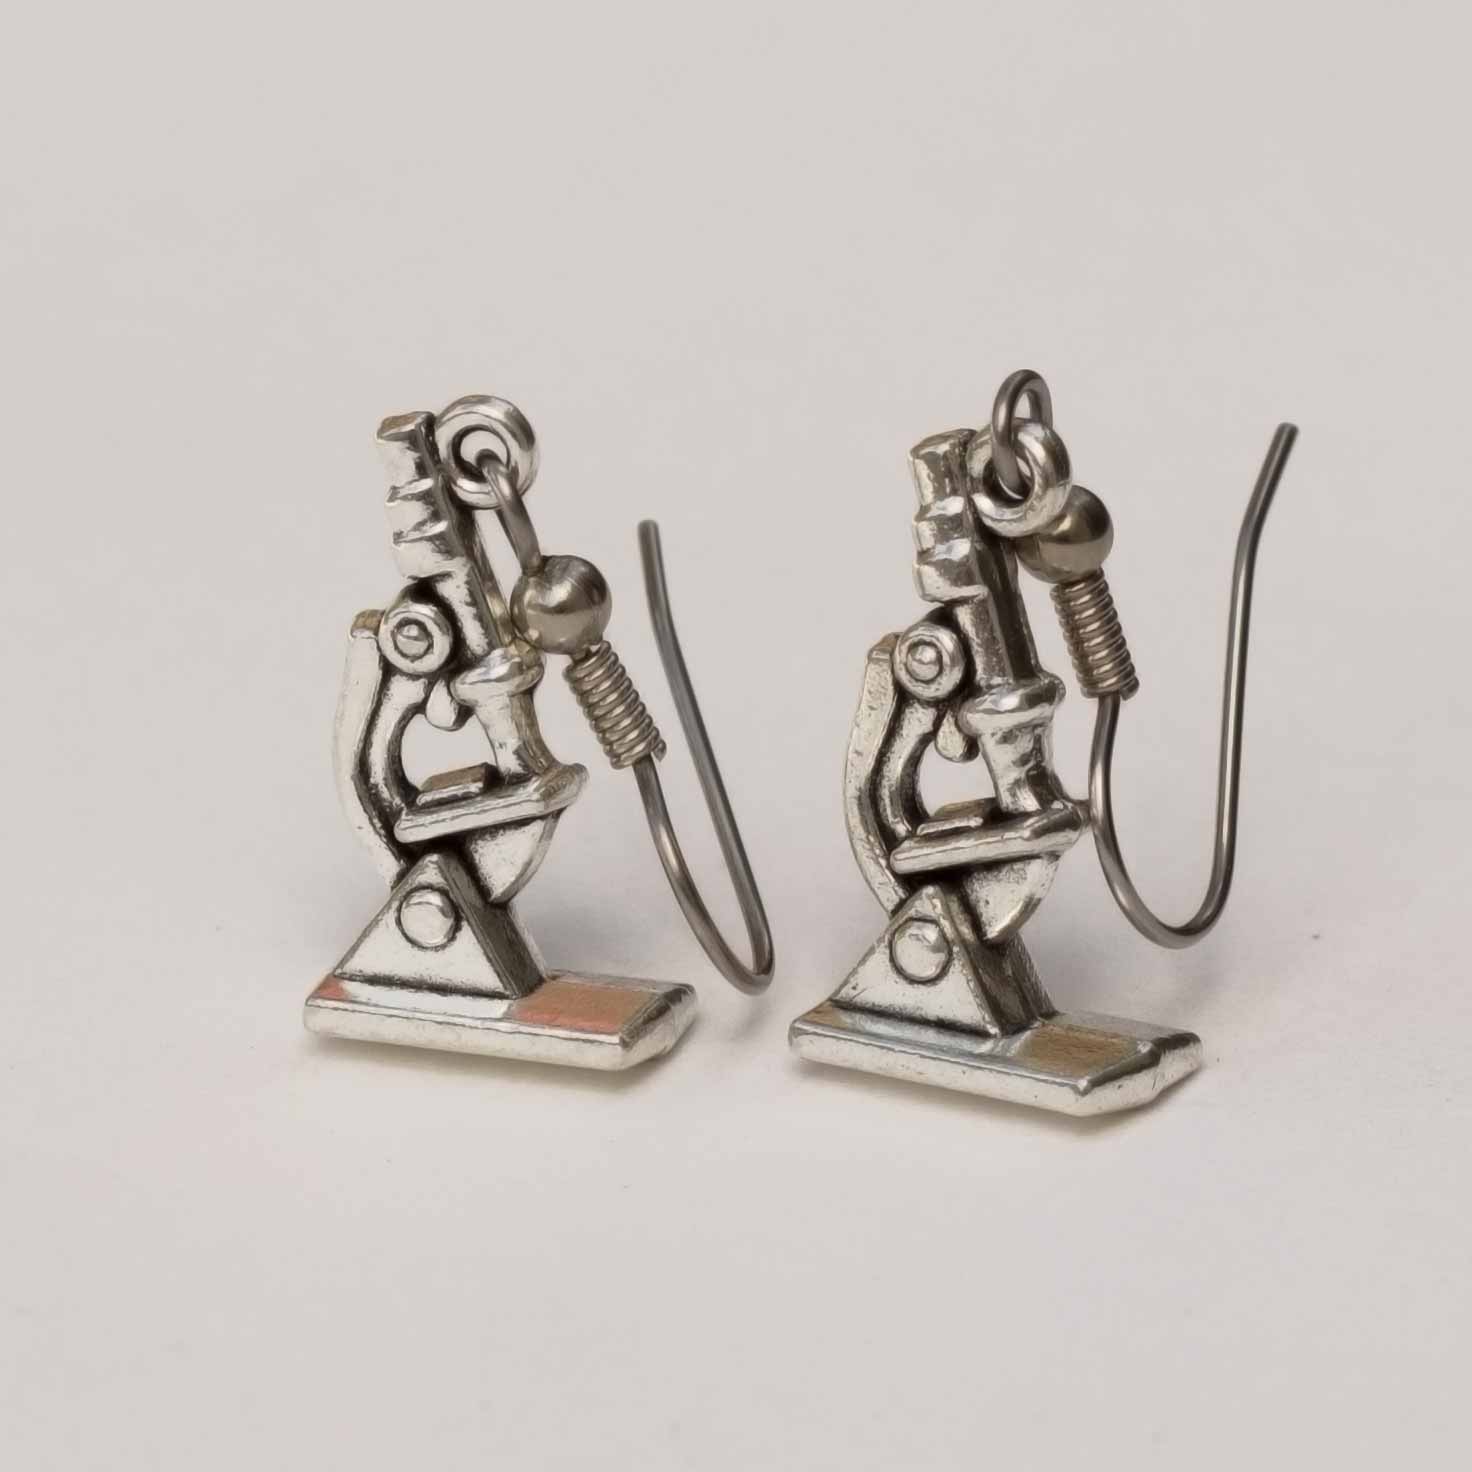 Microscope Earrings - science jewelry for biology, medicine, microbiology, and science teachers.